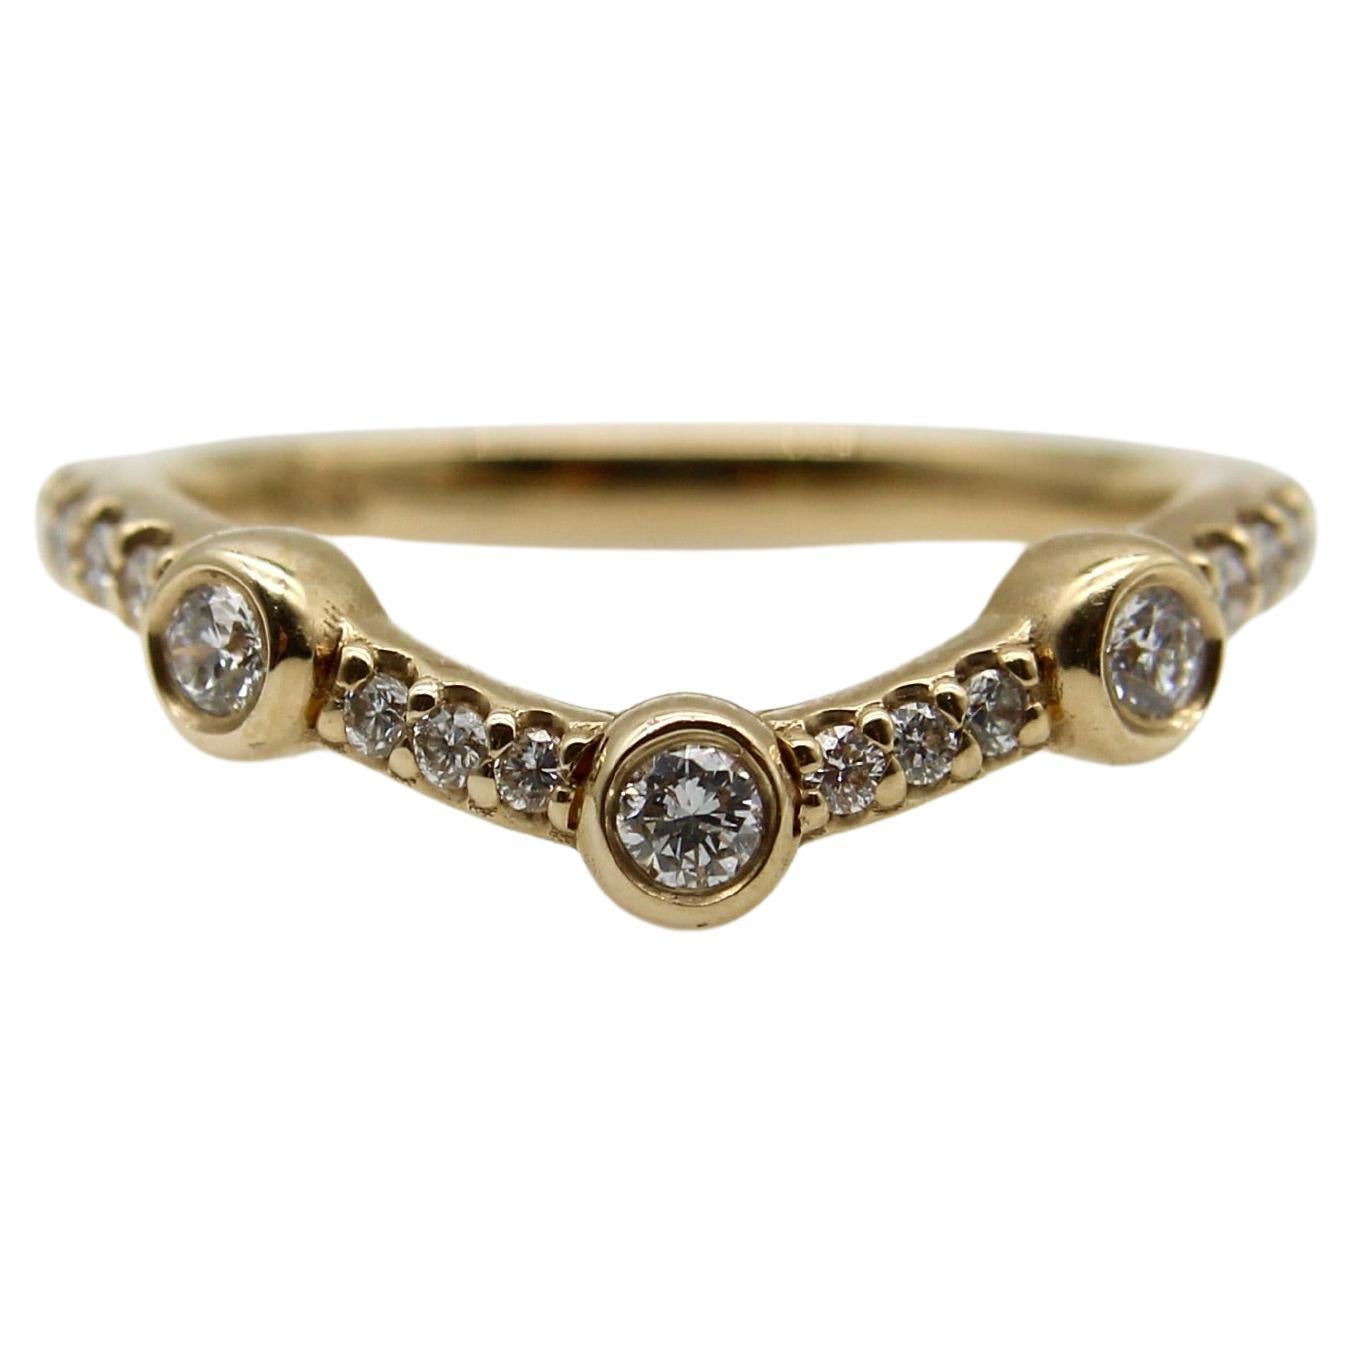 14K Yellow Gold Diamond Curved Band 